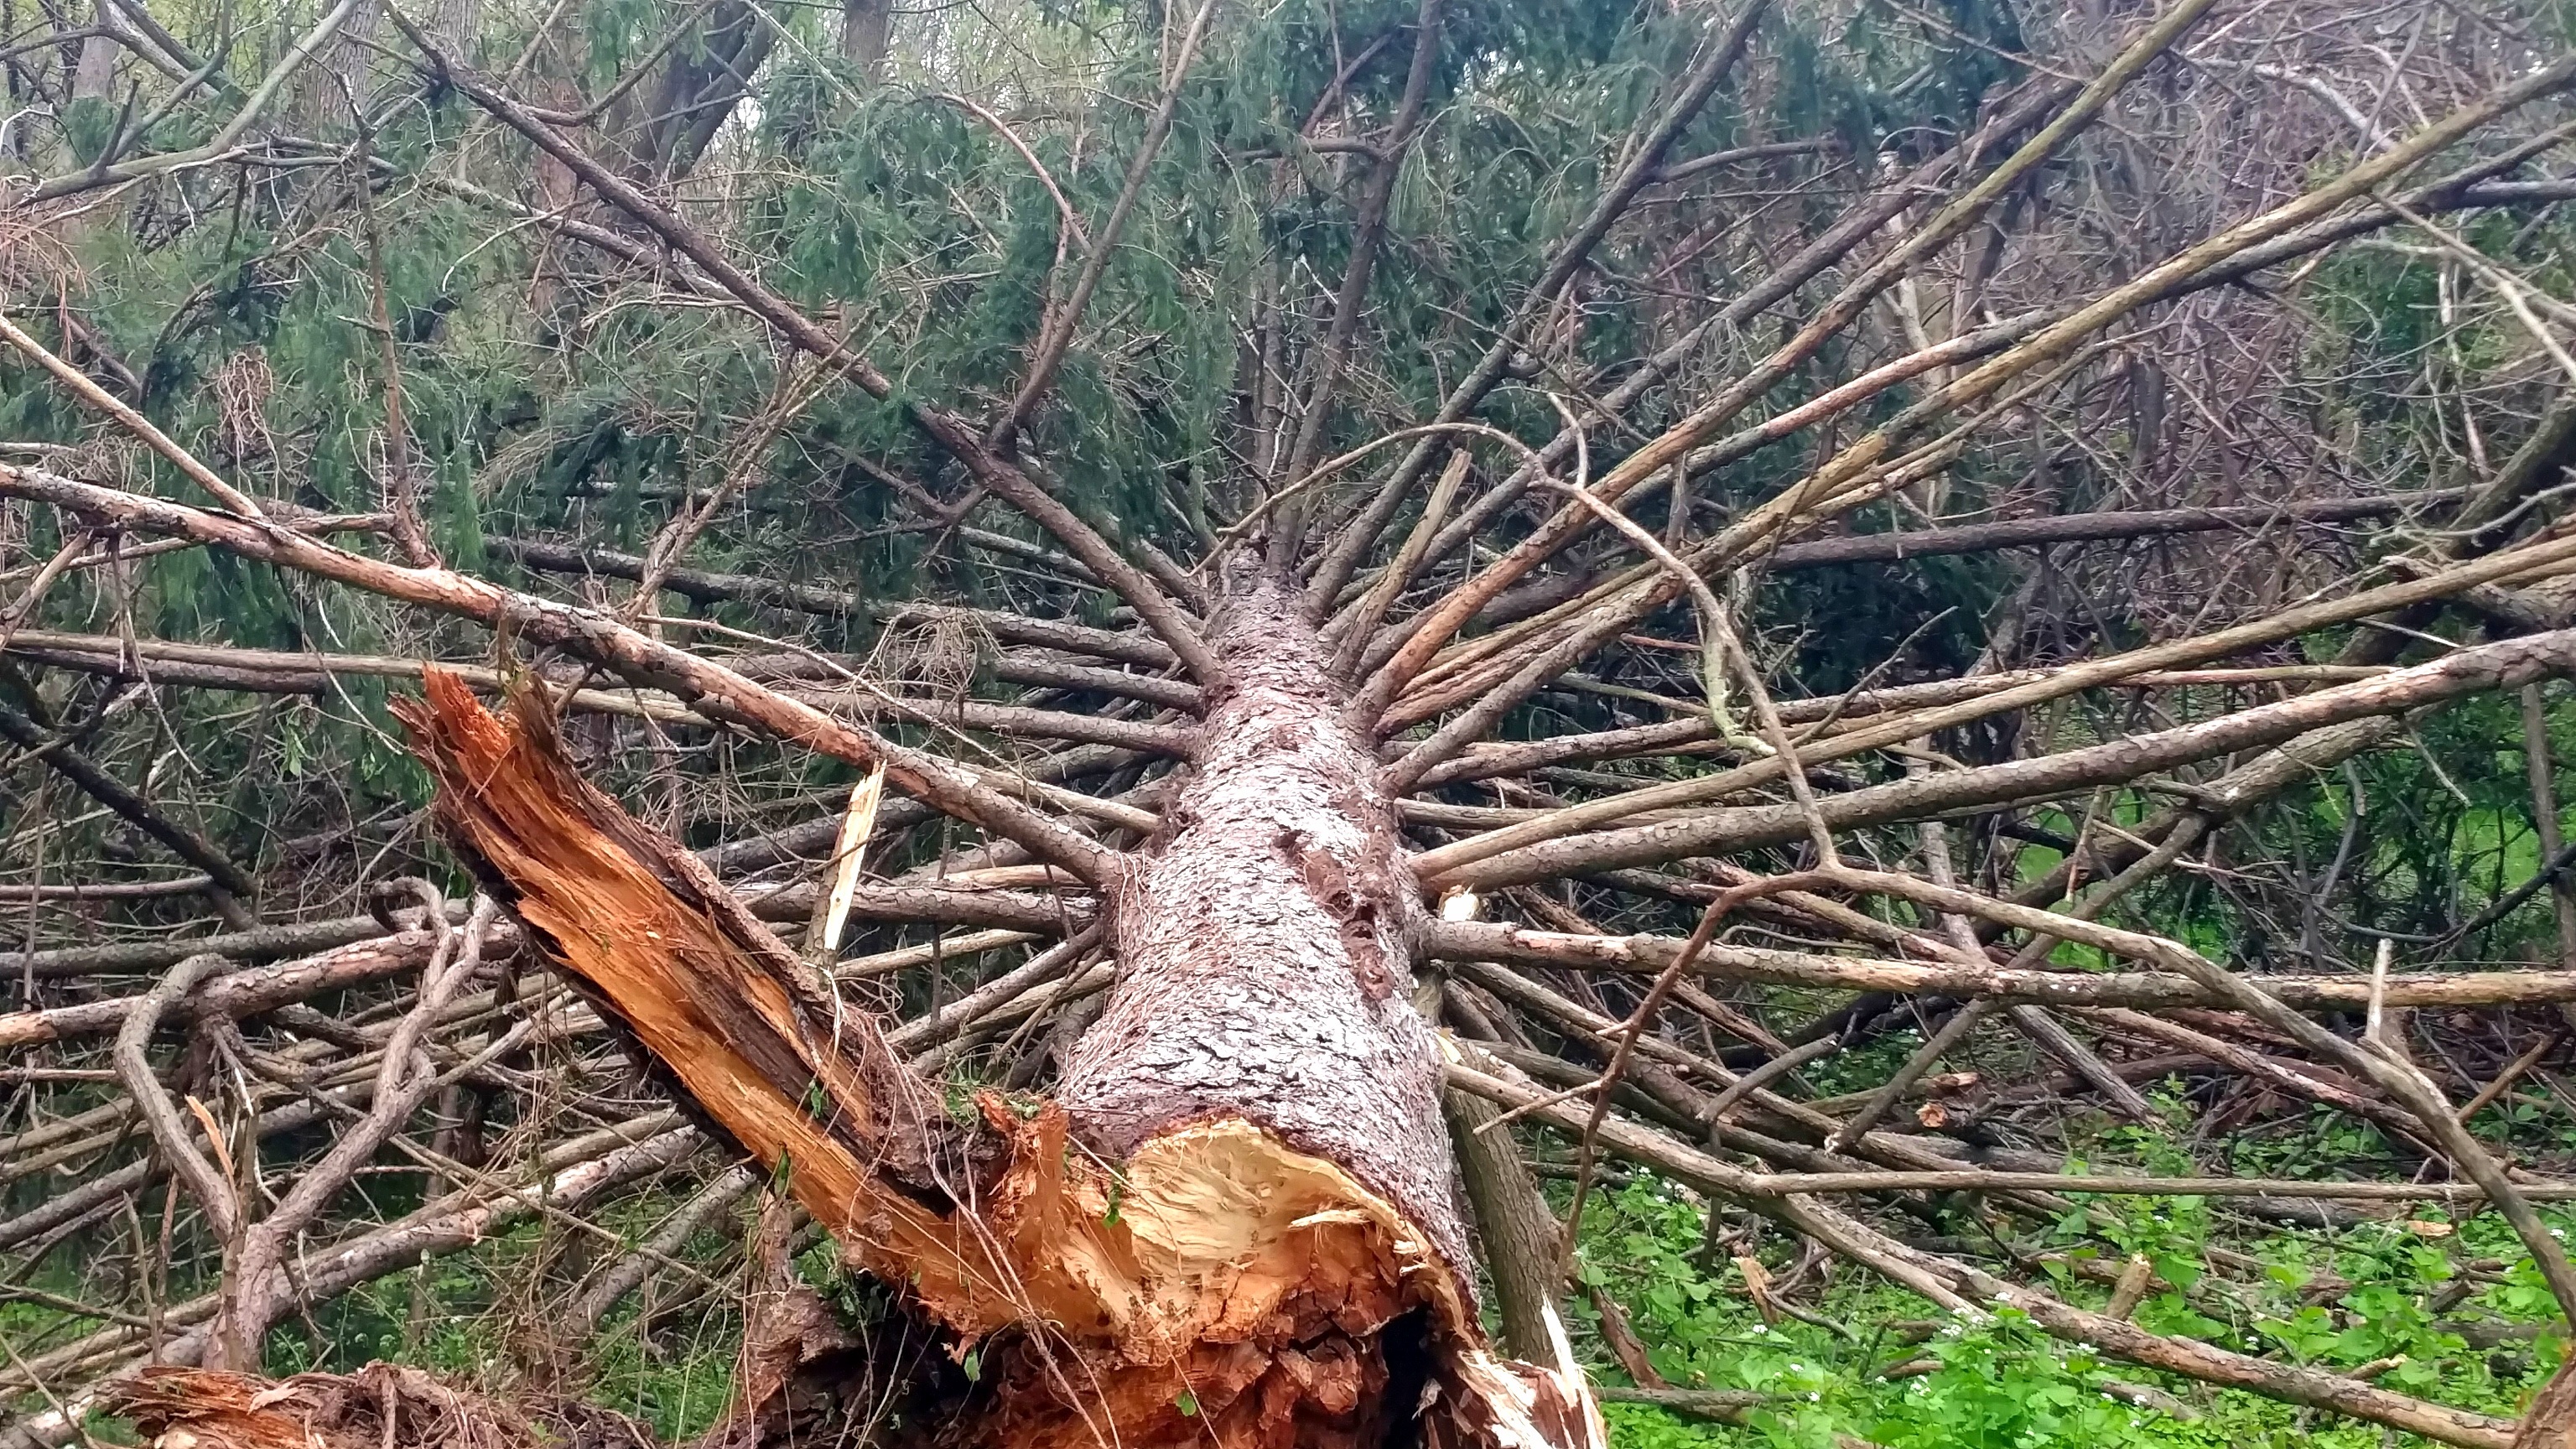 A photograph of a coniferous tree that has fallen over.